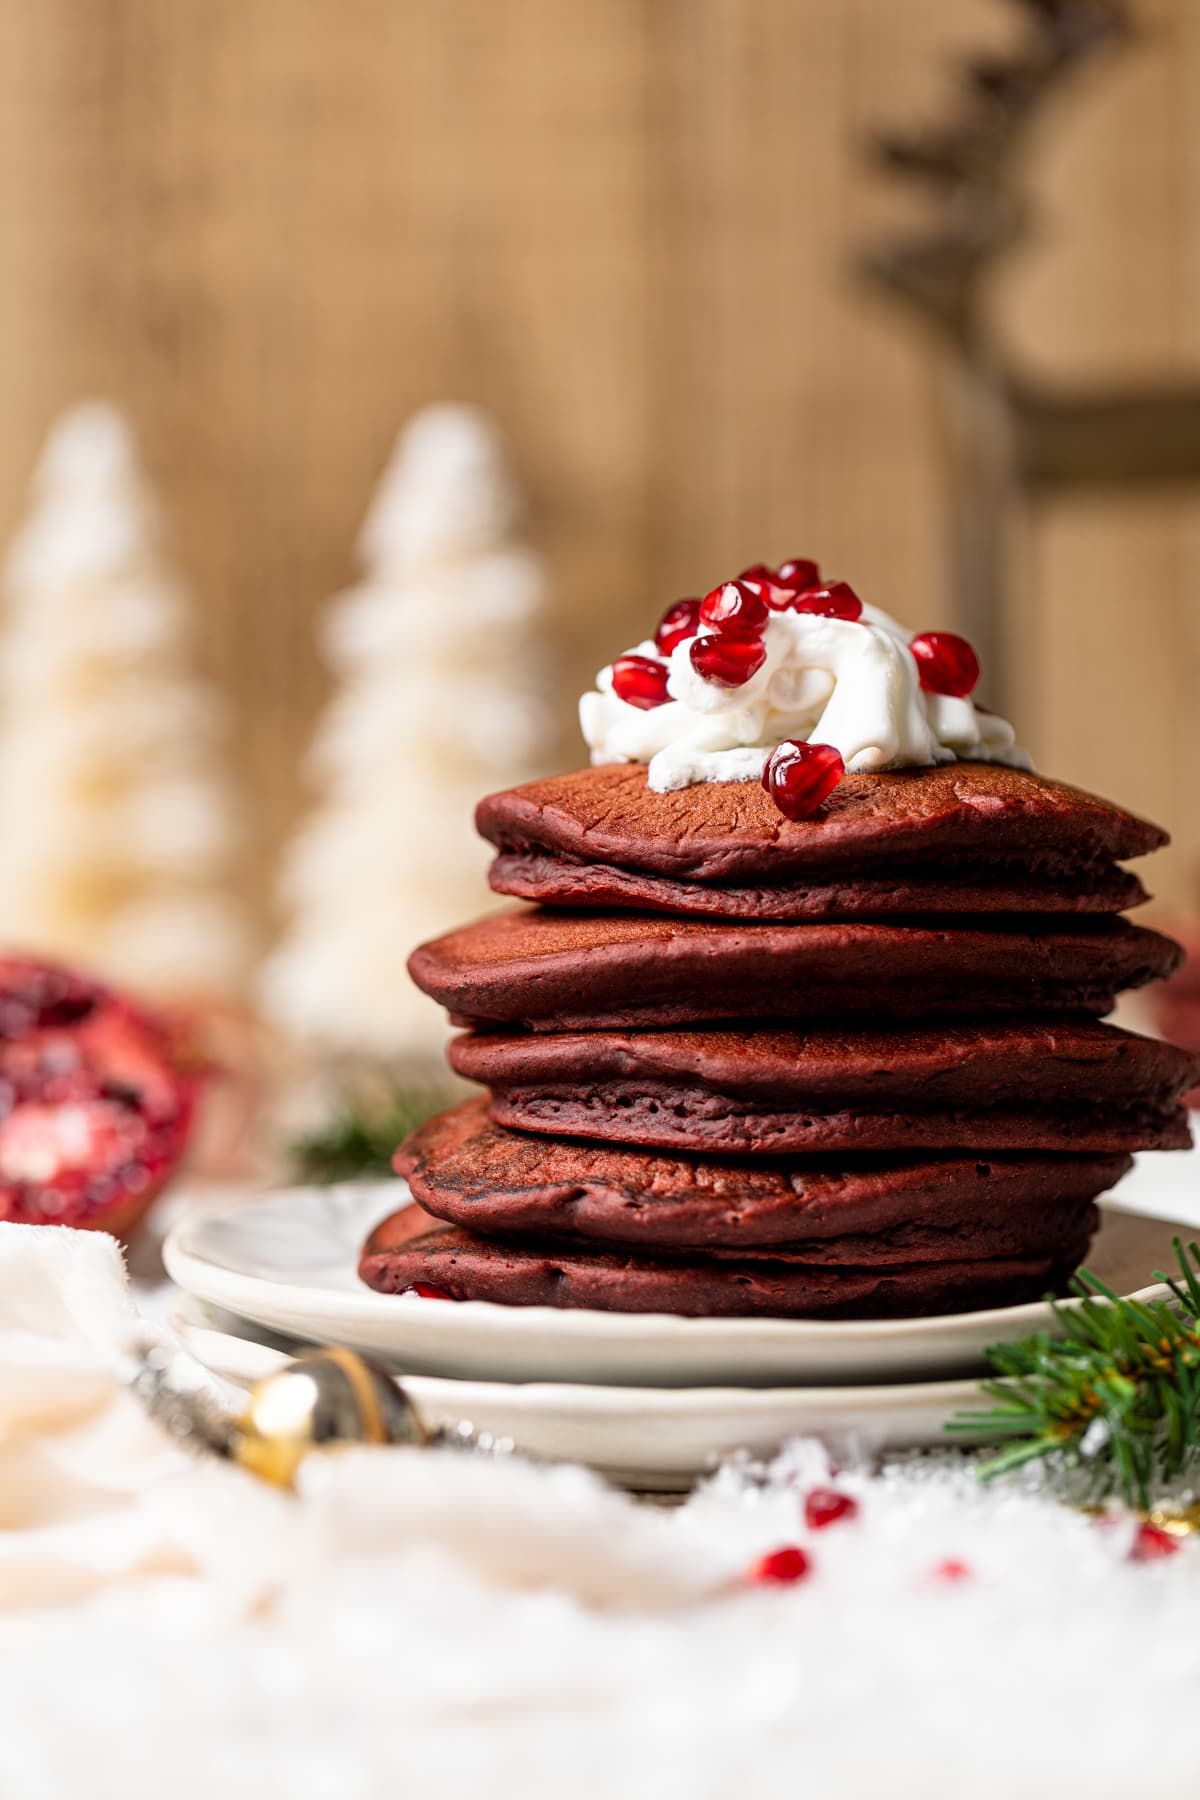 Stack of Fluffy Red Velvet Pancakes topped with whipped cream and pomegranate seeds on two plates near Christmas decorations